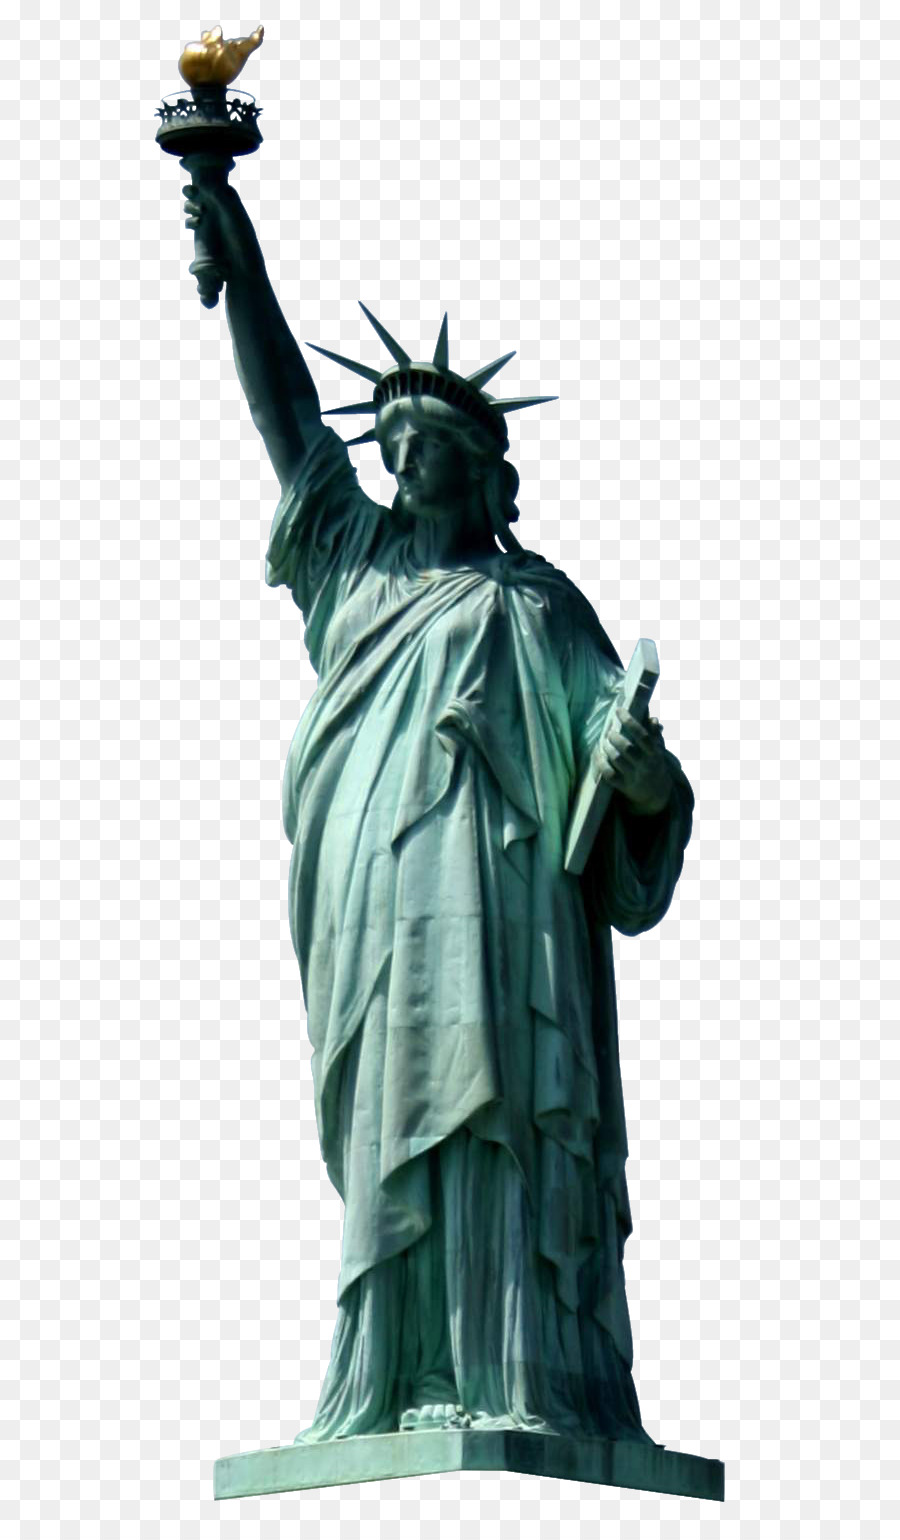 Statue of Liberty Staten Island Ferry The New Colossus - New York Png png download - 668*1534 - Free Transparent Statue Of Liberty png Download.